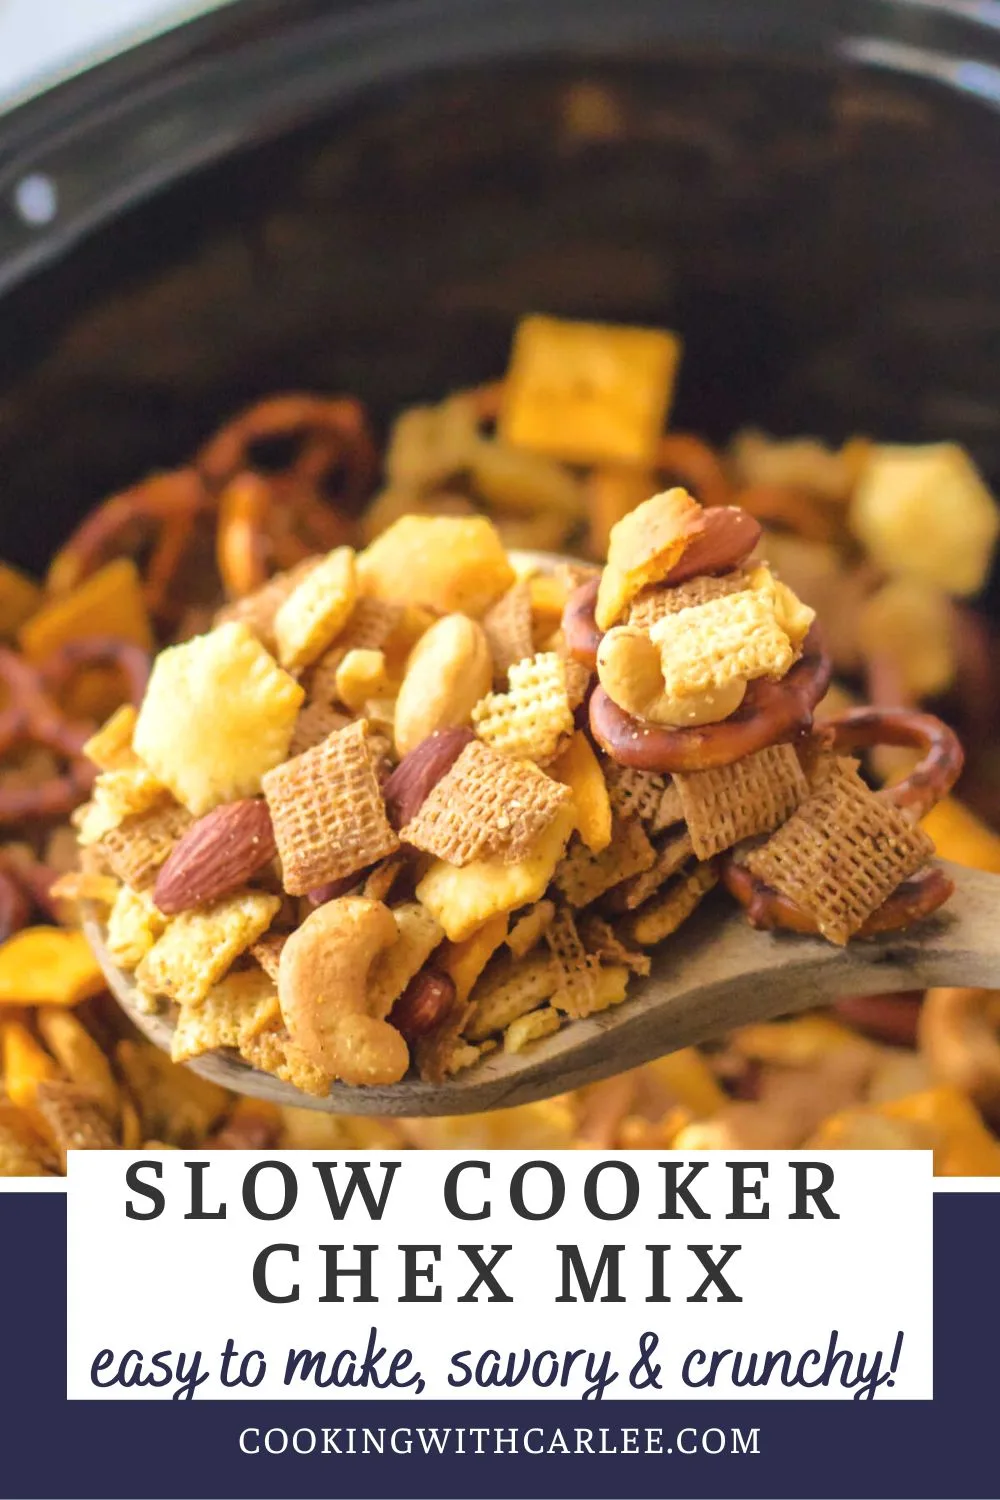 This slow cooker Chex mix recipe gets you the salty crunchy snack mix you crave without having to turn on the oven. It is perfect for the holidays, parties, road trips and more.